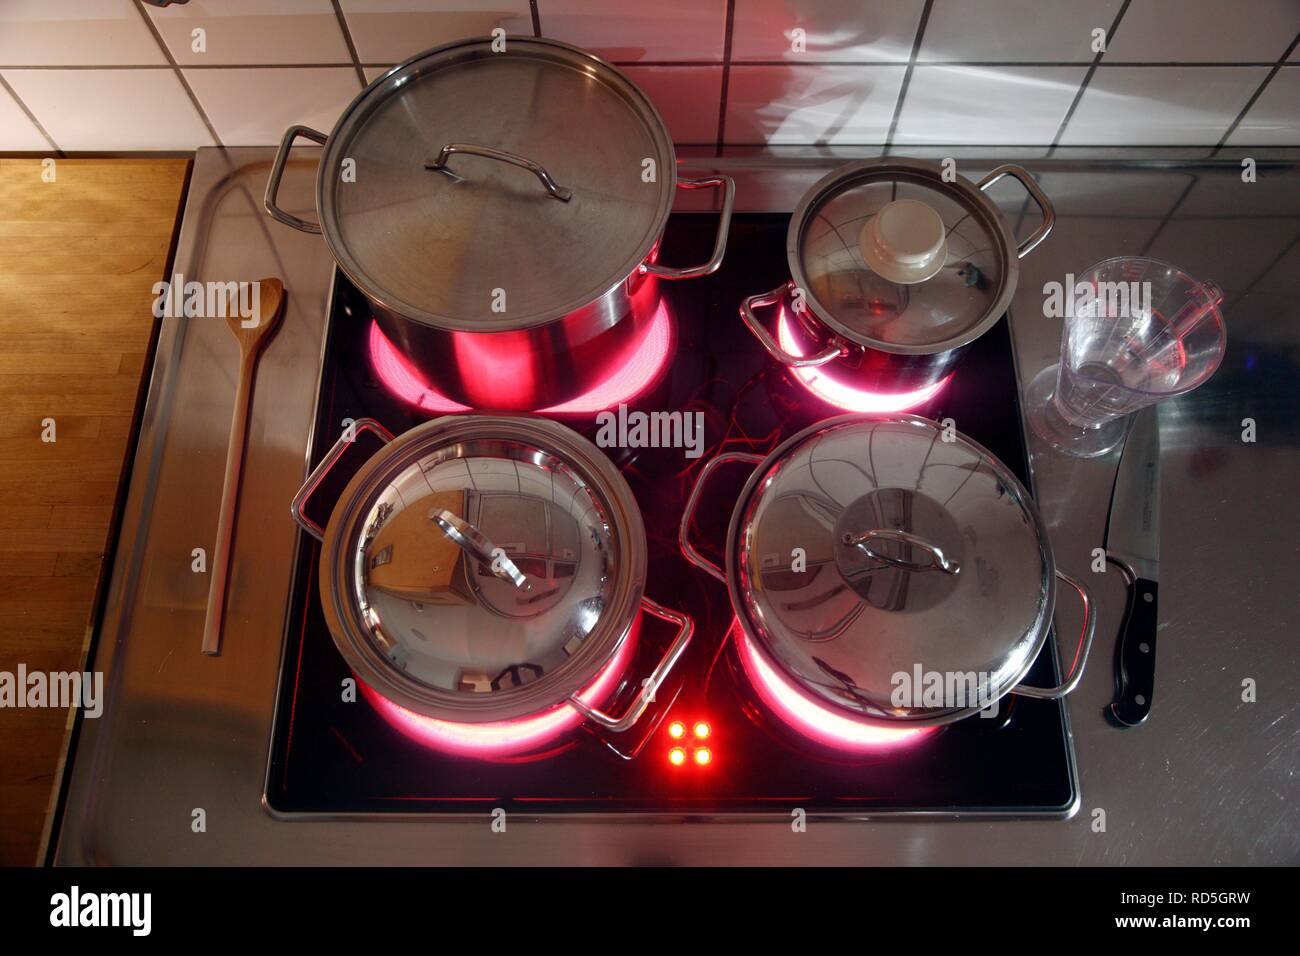 Electric stovetop stock image. Image of steel, shiny, round - 5221201